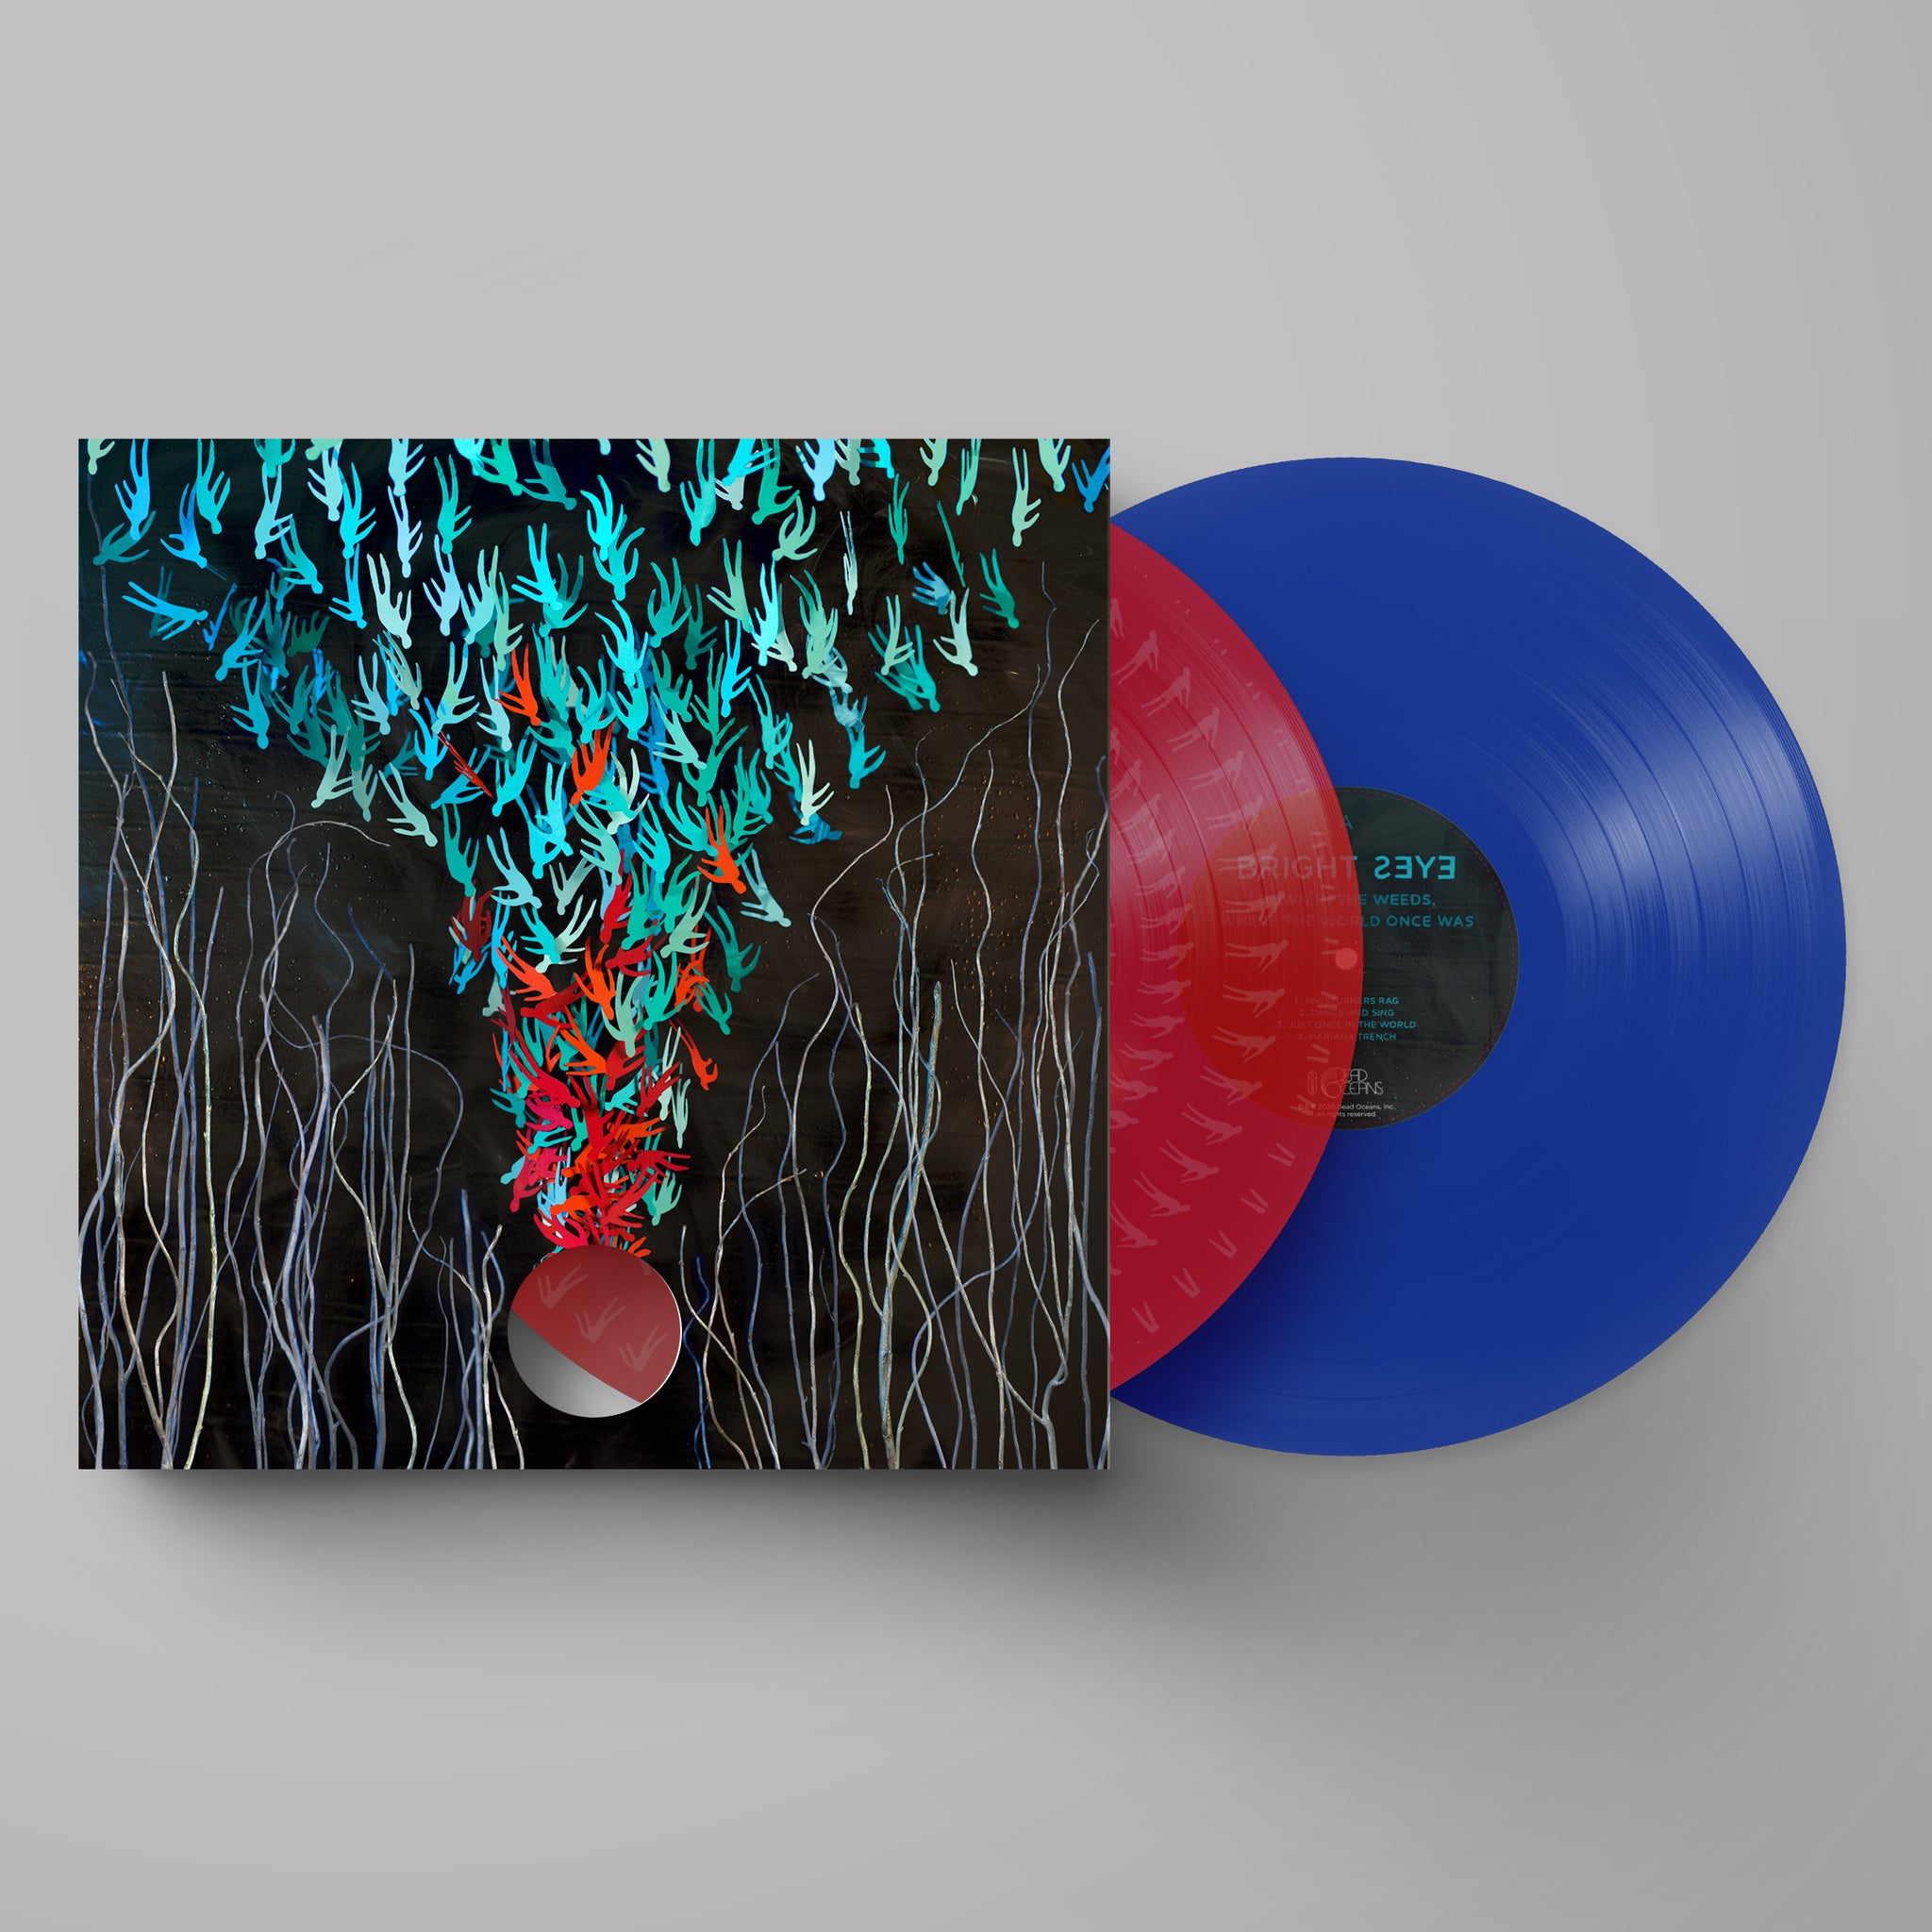 BRIGHT EYES - Down in the Weeds, Where the World Once Was - 2LP - Limited Indies Blue & Red Vinyl